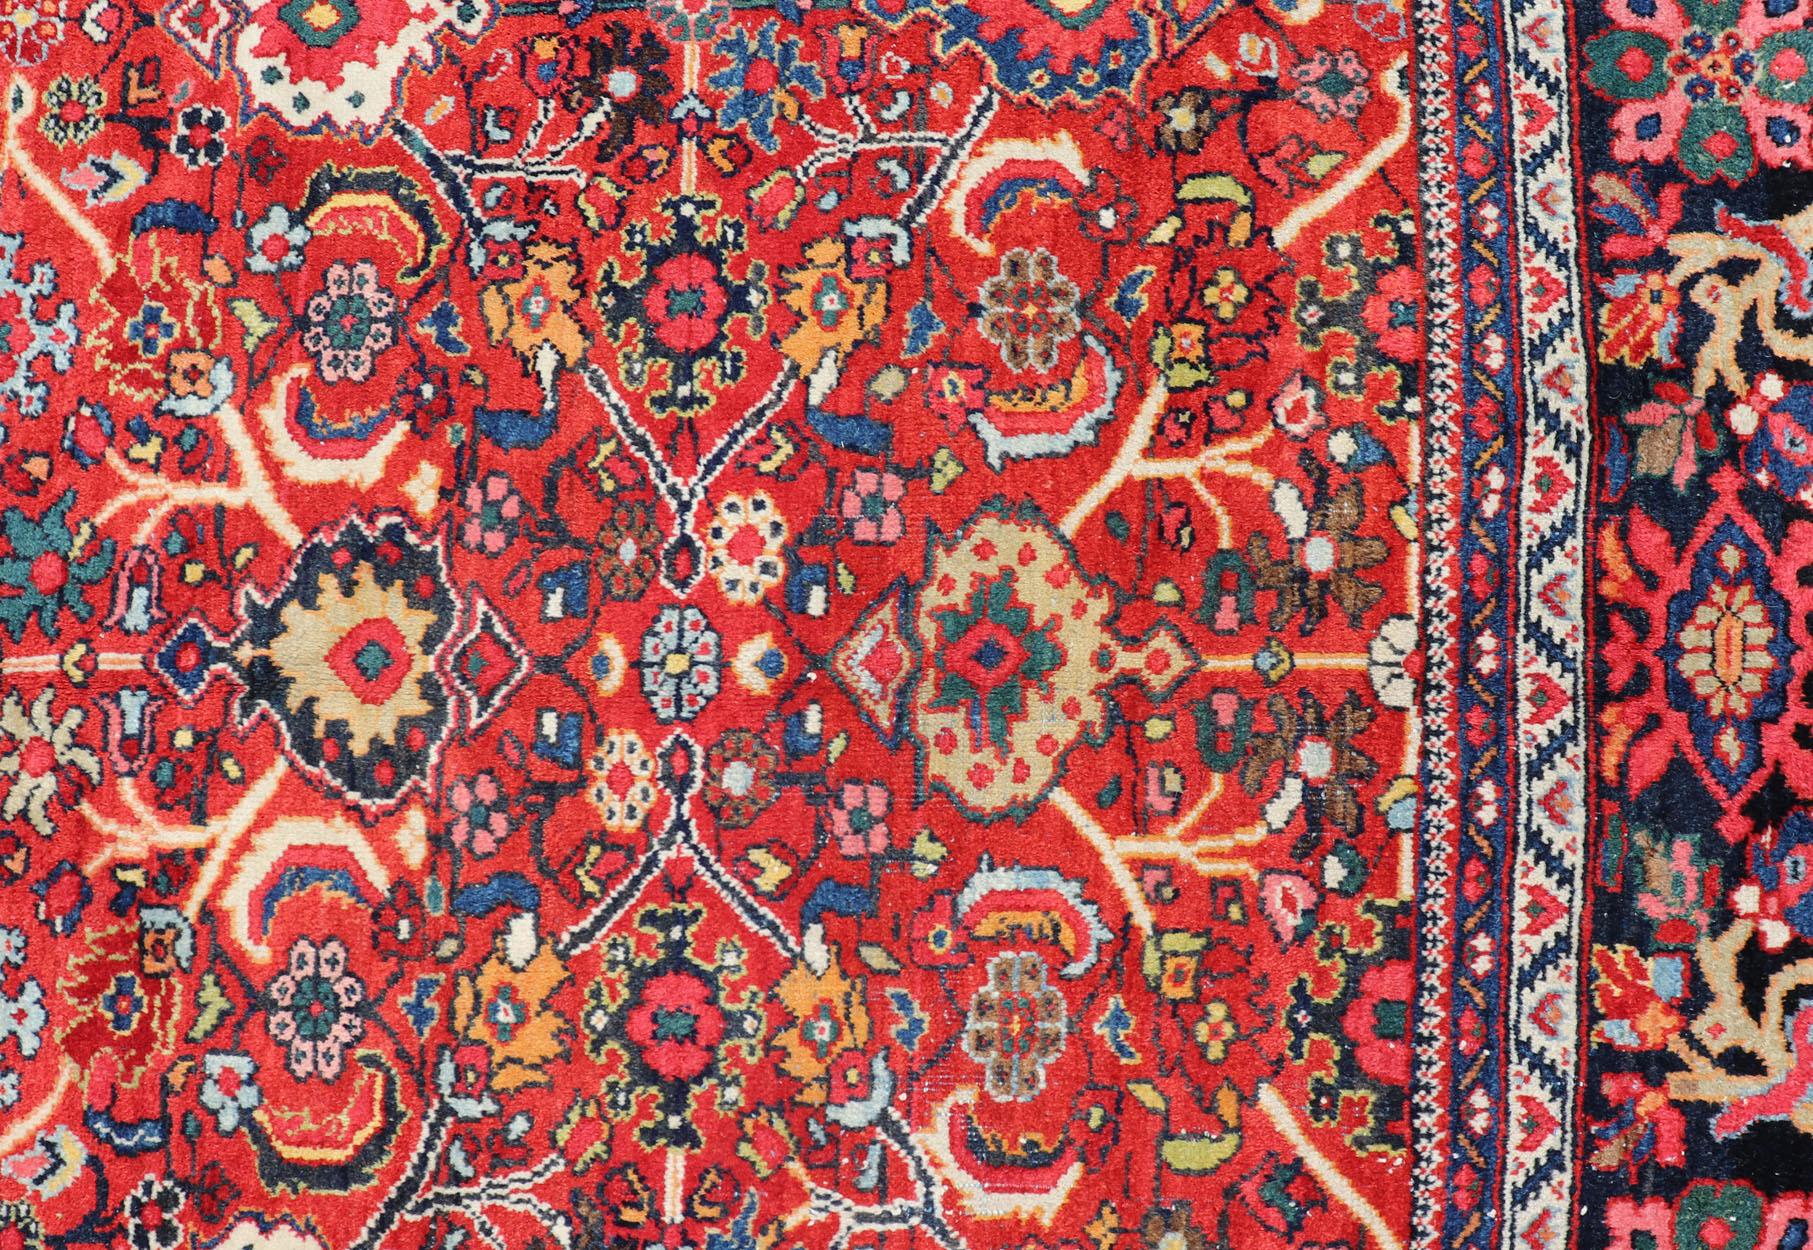  Antique Persian Sultanabad Mahal Rug With All-Over Sub Geometric Design

Beautiful and rich Red background with multi colors antique Persian Sultanabad Mahal rug with All Over Geometric Design, Keivan Woven Arts /rug /PTA-200722, country of origin